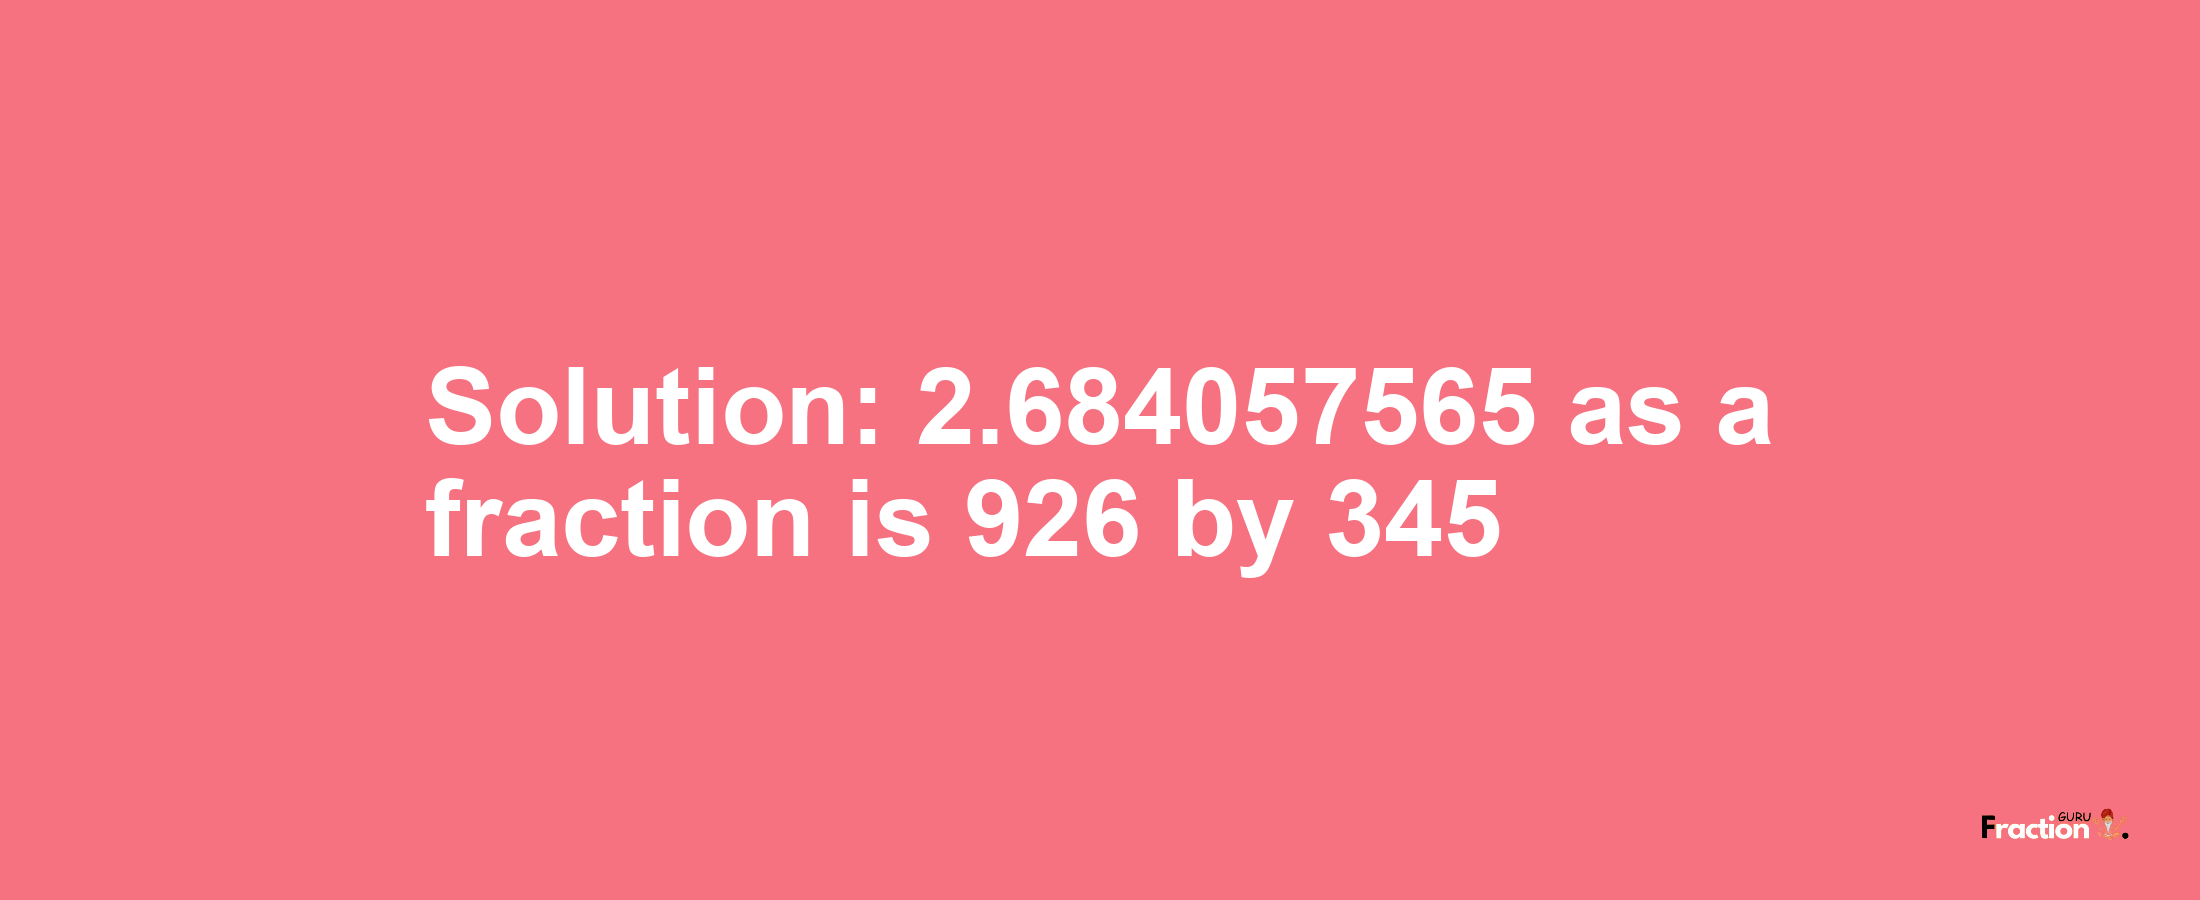 Solution:2.684057565 as a fraction is 926/345